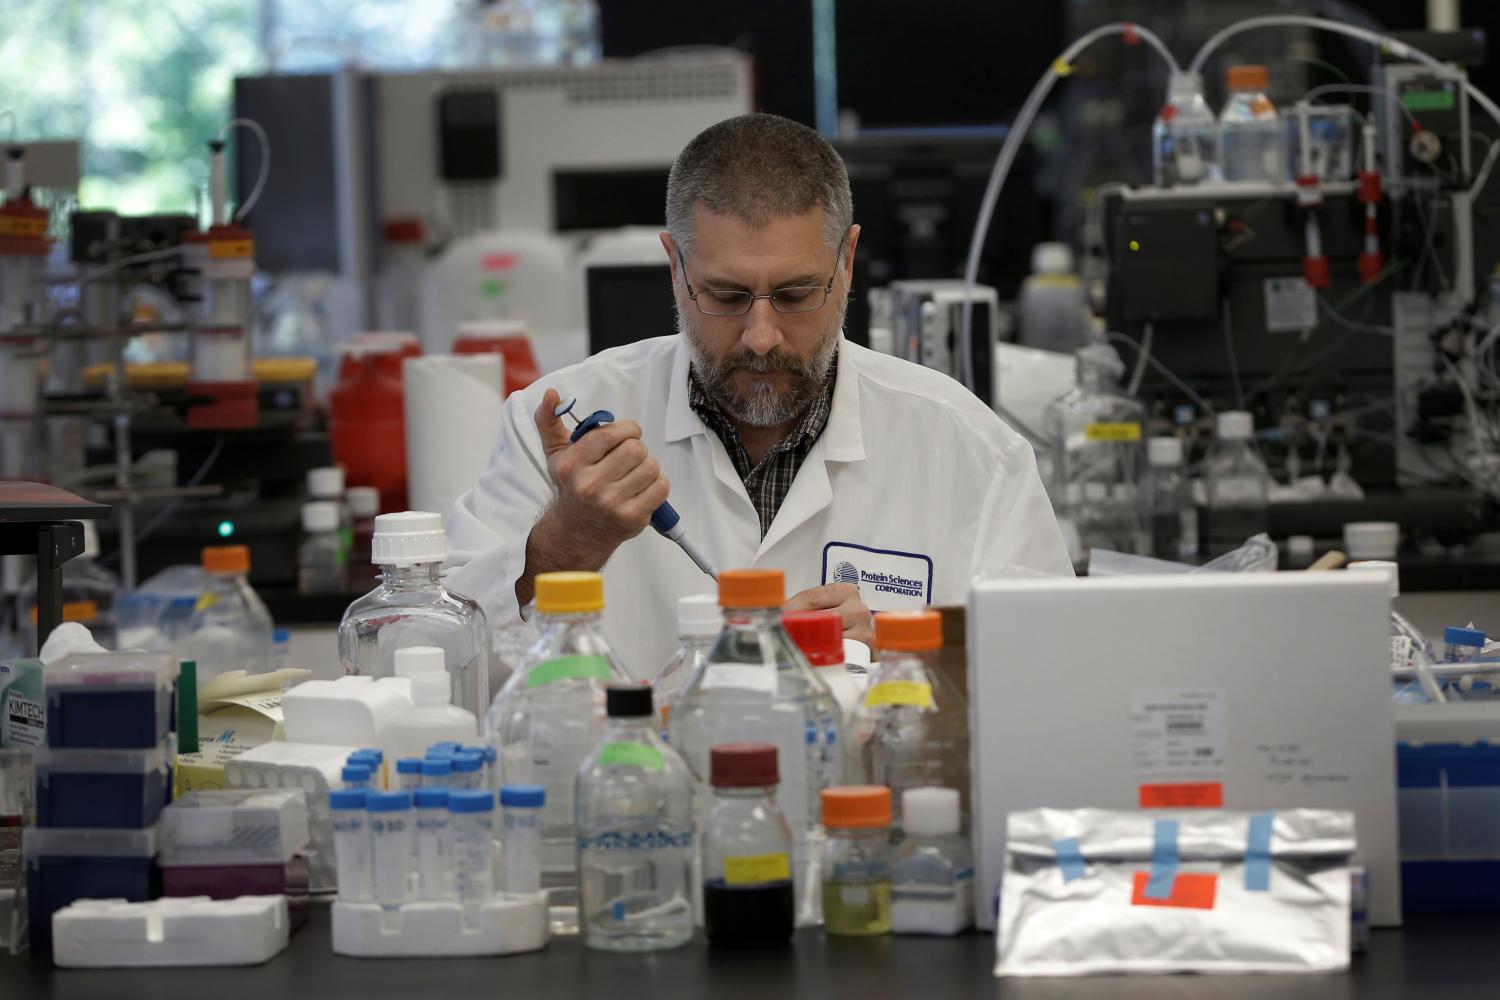 Research scientist Dan Galperin works in the research labaratory at Protein Sciences Inc. where they are working on developing a vaccine for the Zika virus